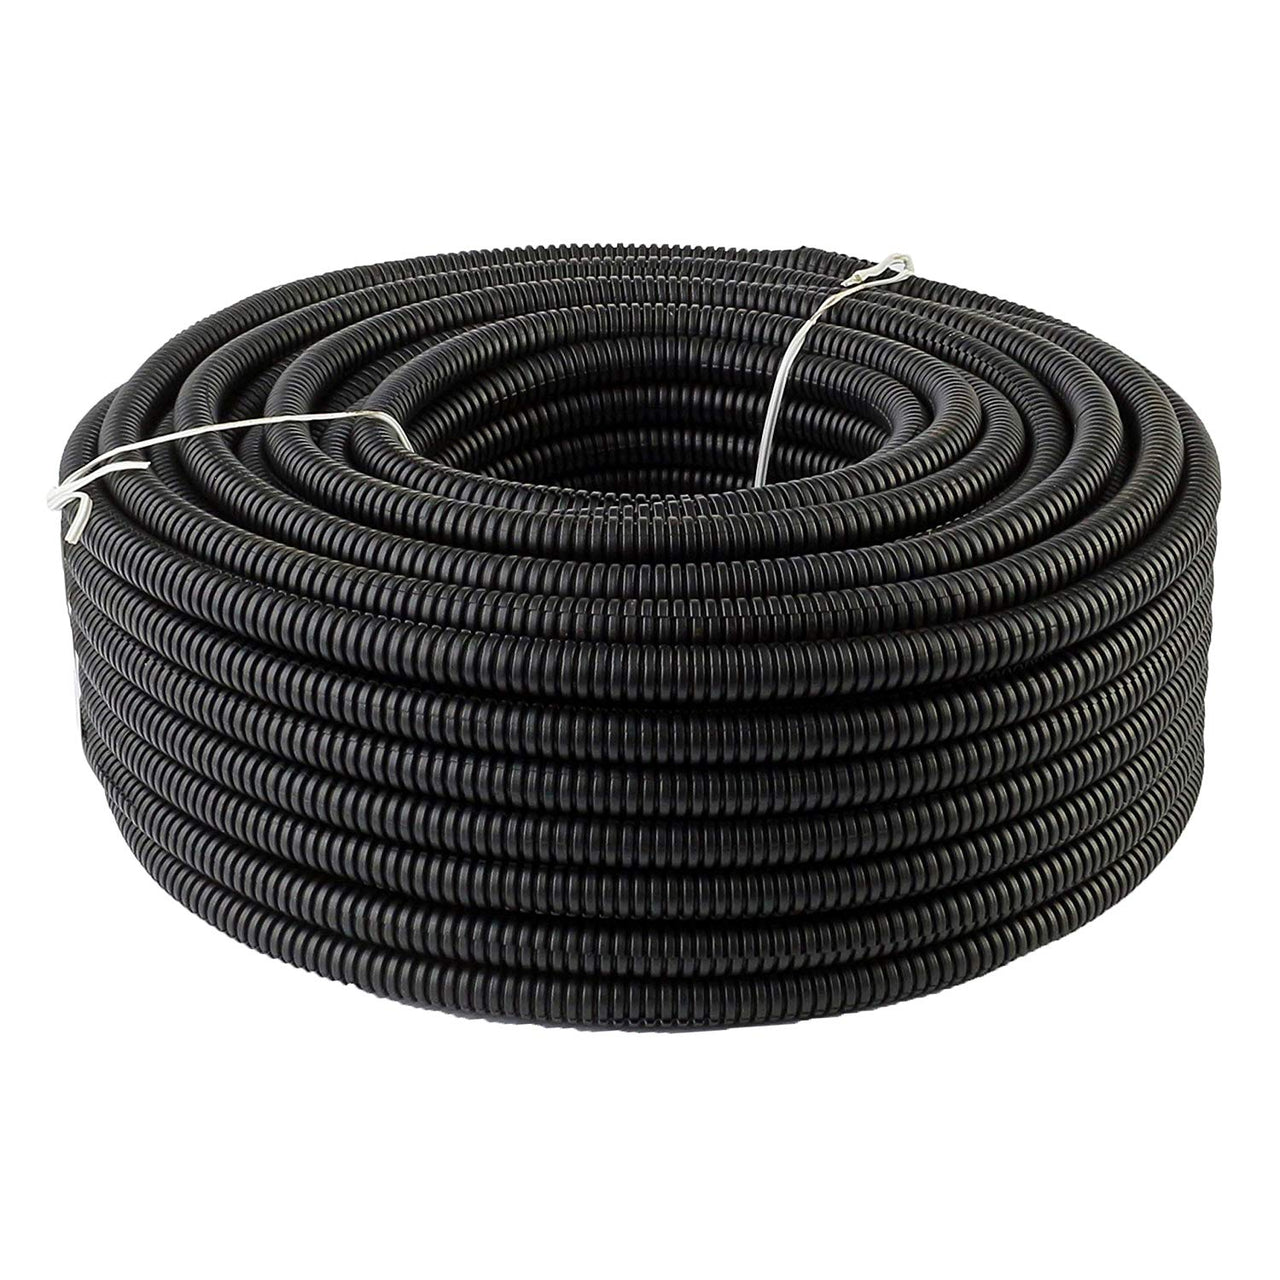 Absolute USA 100 Ft Each Size 1/4" 3/8" 1/2" New Split Loom Polyethylene Wire Tubing Cable